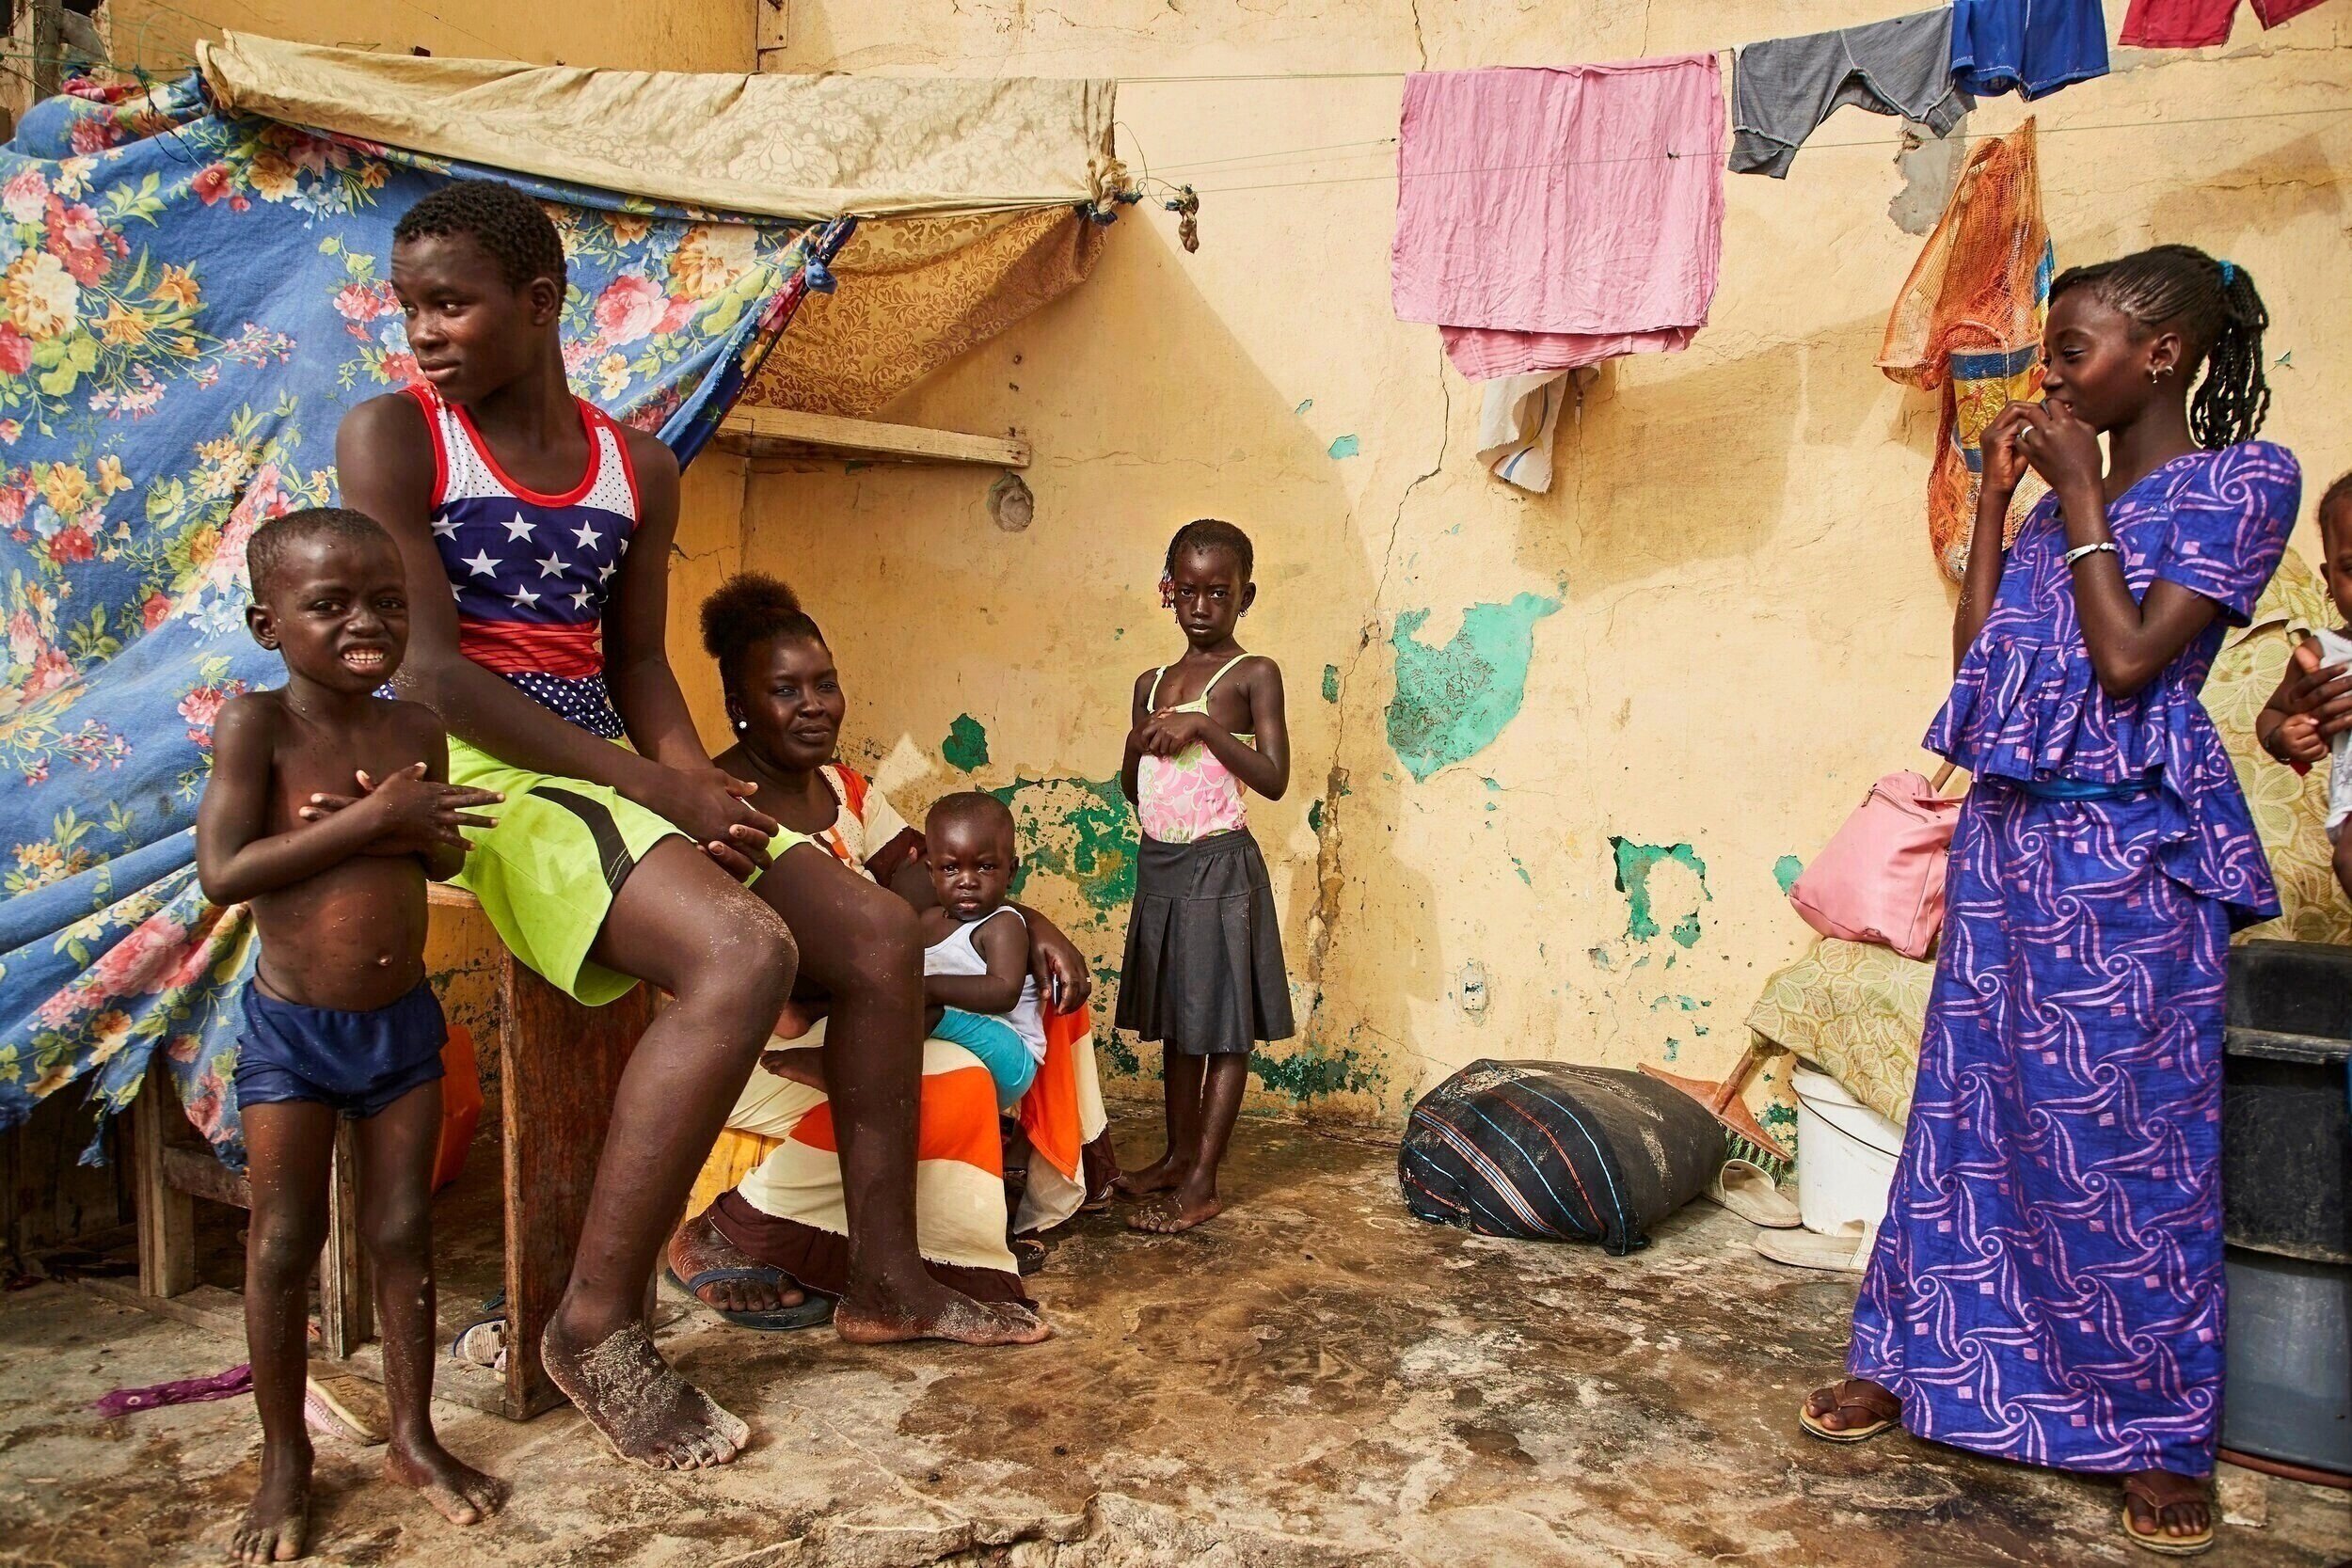  Fatou Ngueye, 34, sits within the last 2 remaining walls of her living room -which is now open to the sand and ocean- with her children. The family has been sleeping on the floor of a neighbor’s home for over a year so that her husband, a fisherman,